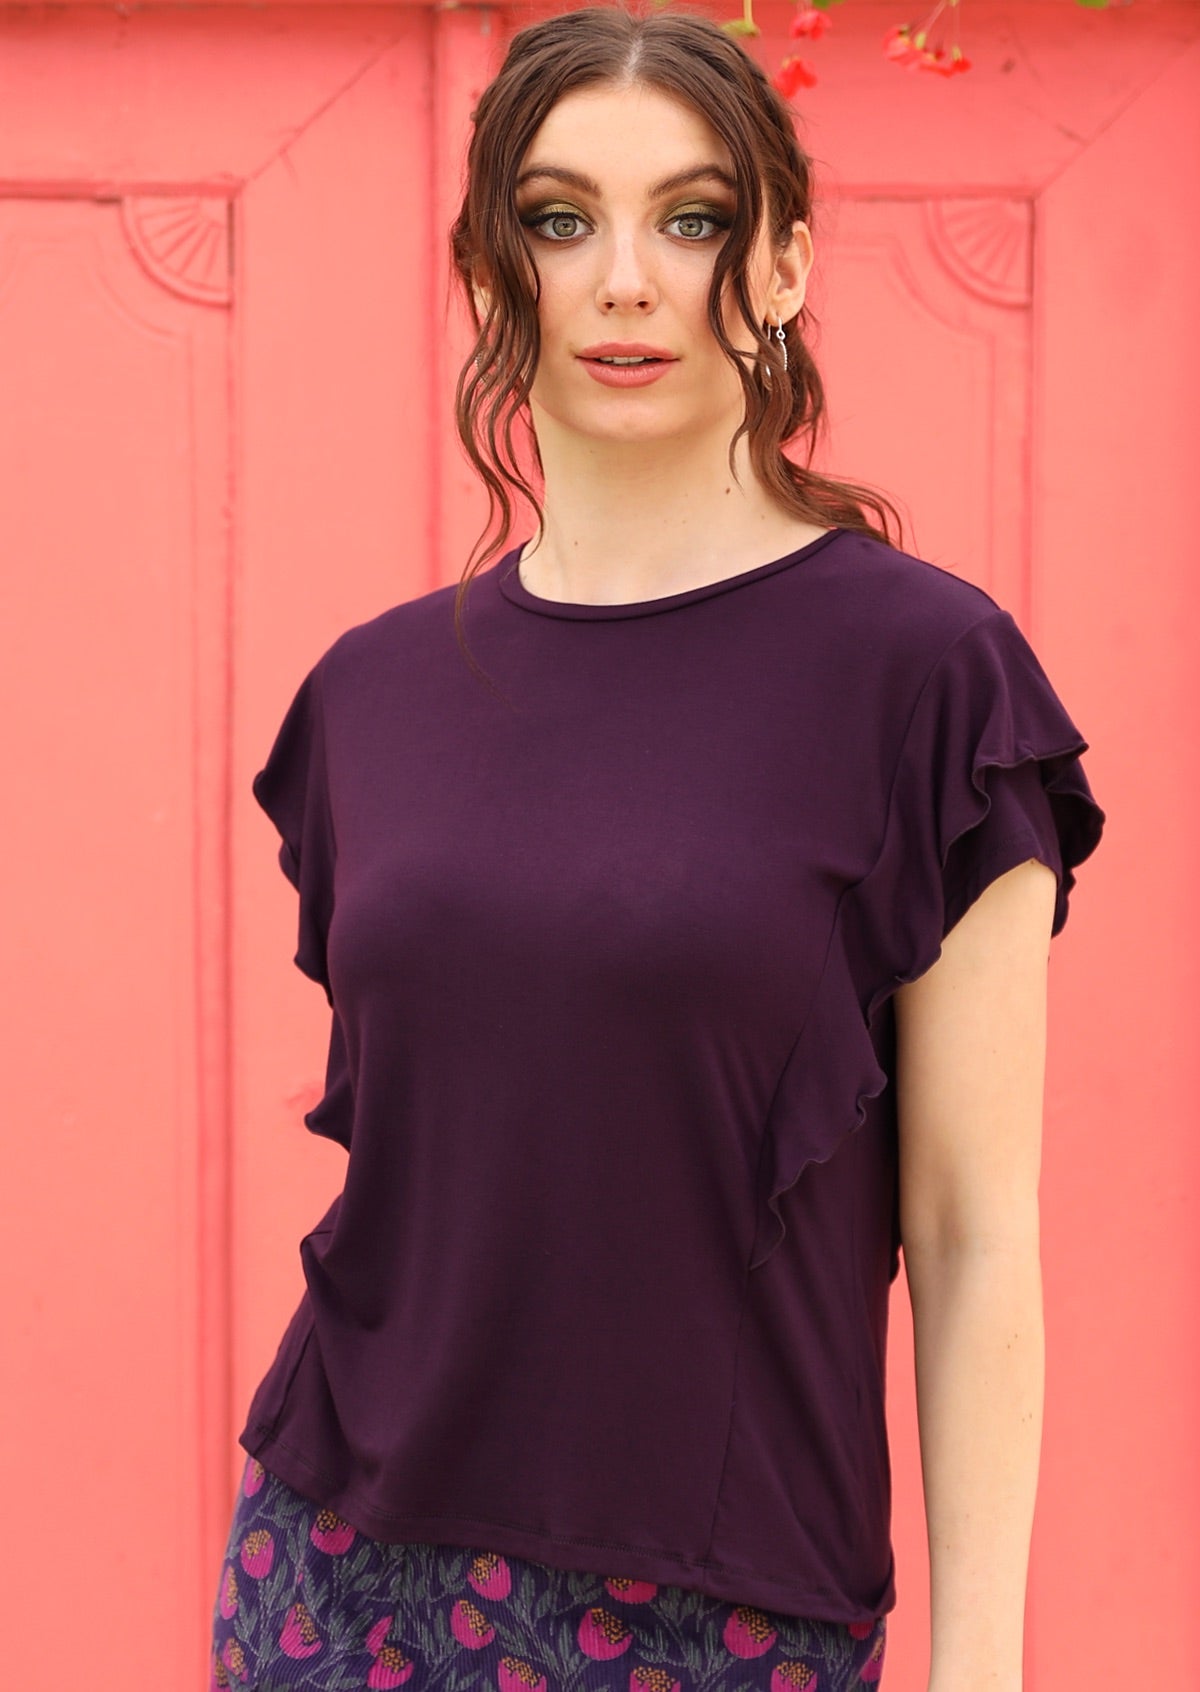 Woman wearing a ruffle purple round neck short cap sleeve rayon top with a floral skirt.